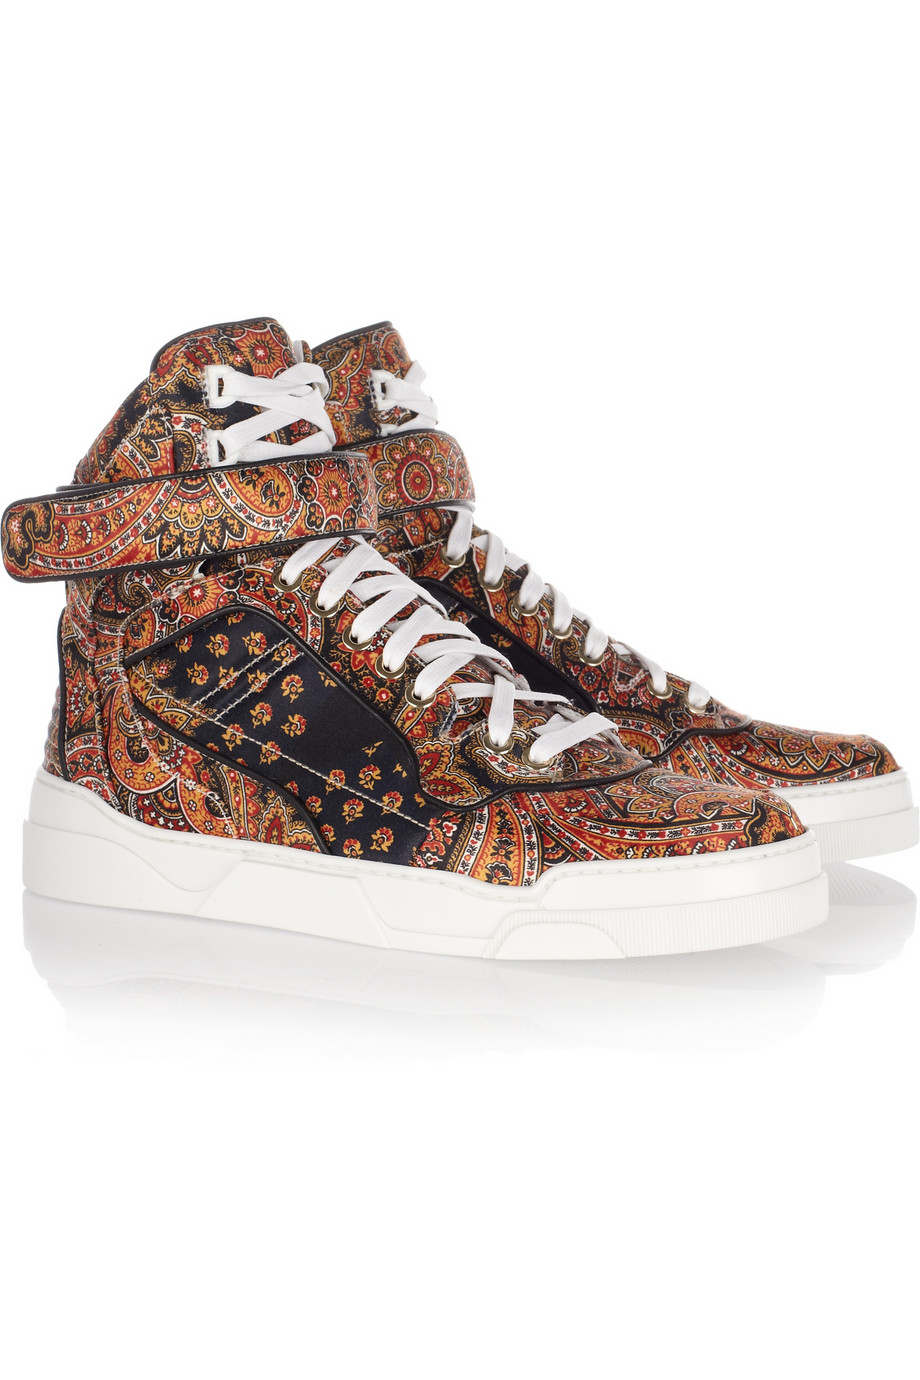 DIARY OF A CLOTHESHORSE: THE GIVENCHY SILK TWILL HI TOPS